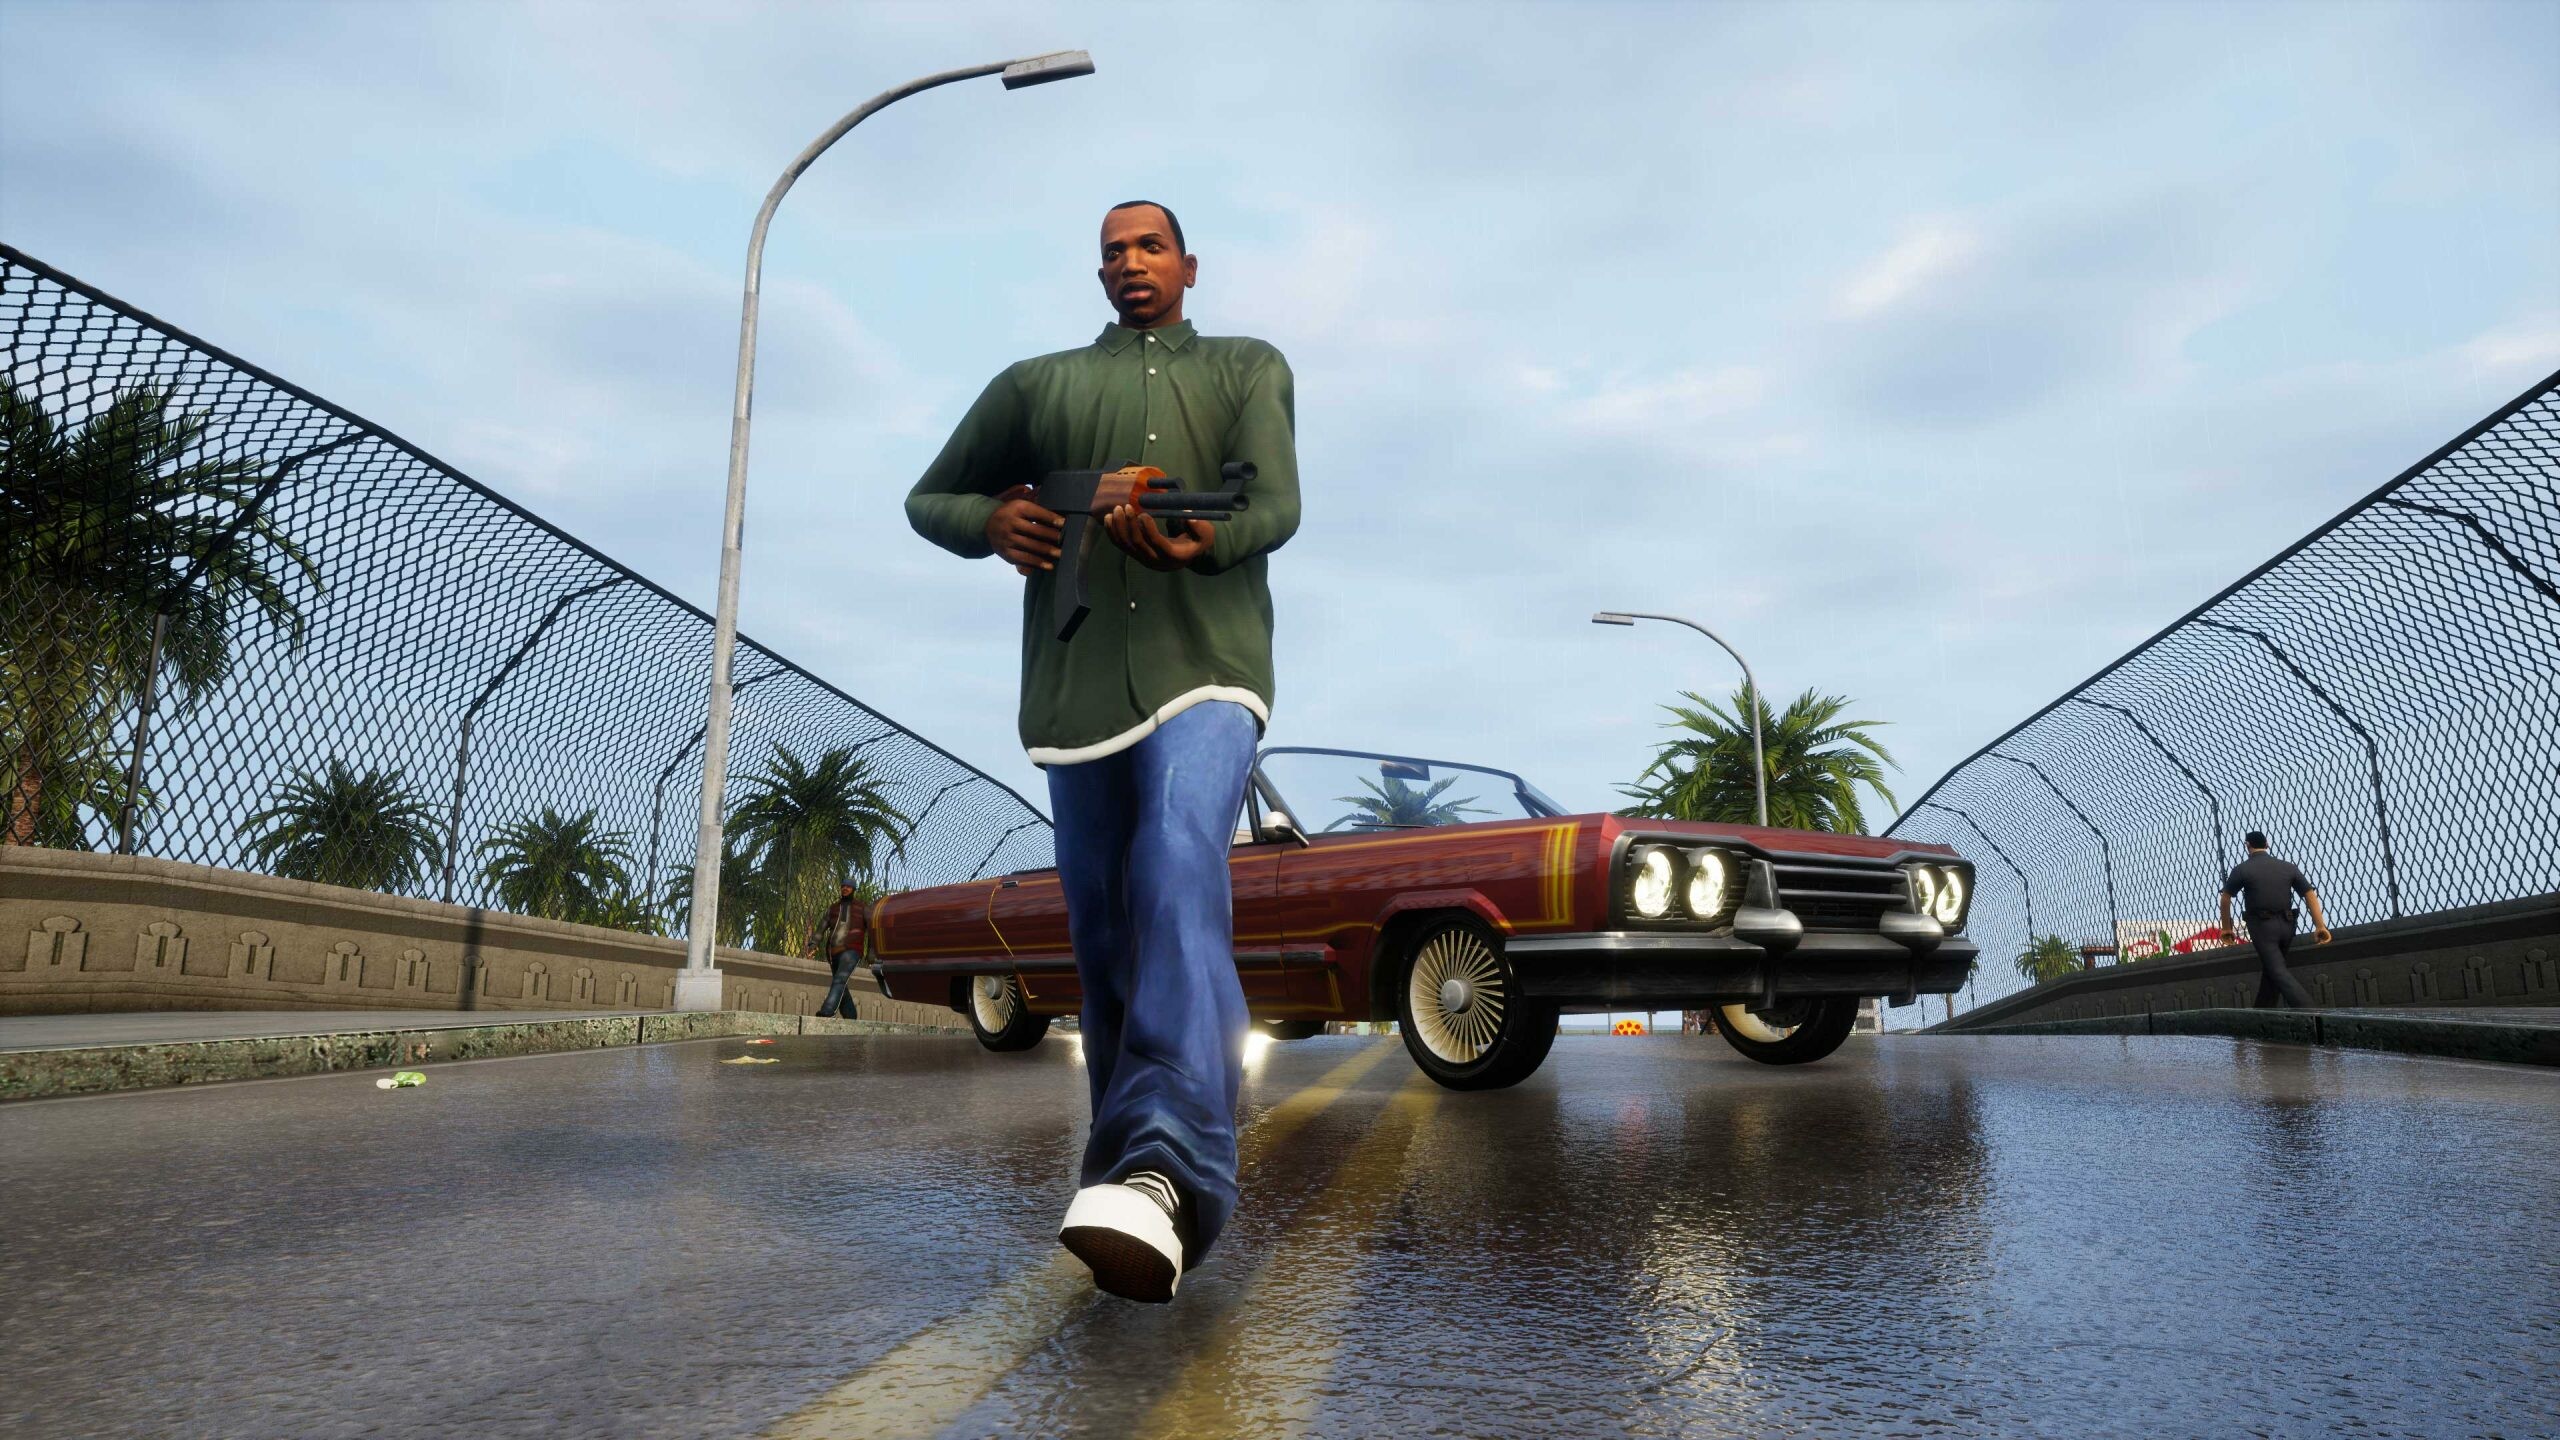 Grand Theft Auto: San Andreas: The game features references to many real-life elements of the world, such as its cities, regions, and landmarks. 2560x1440 HD Background.